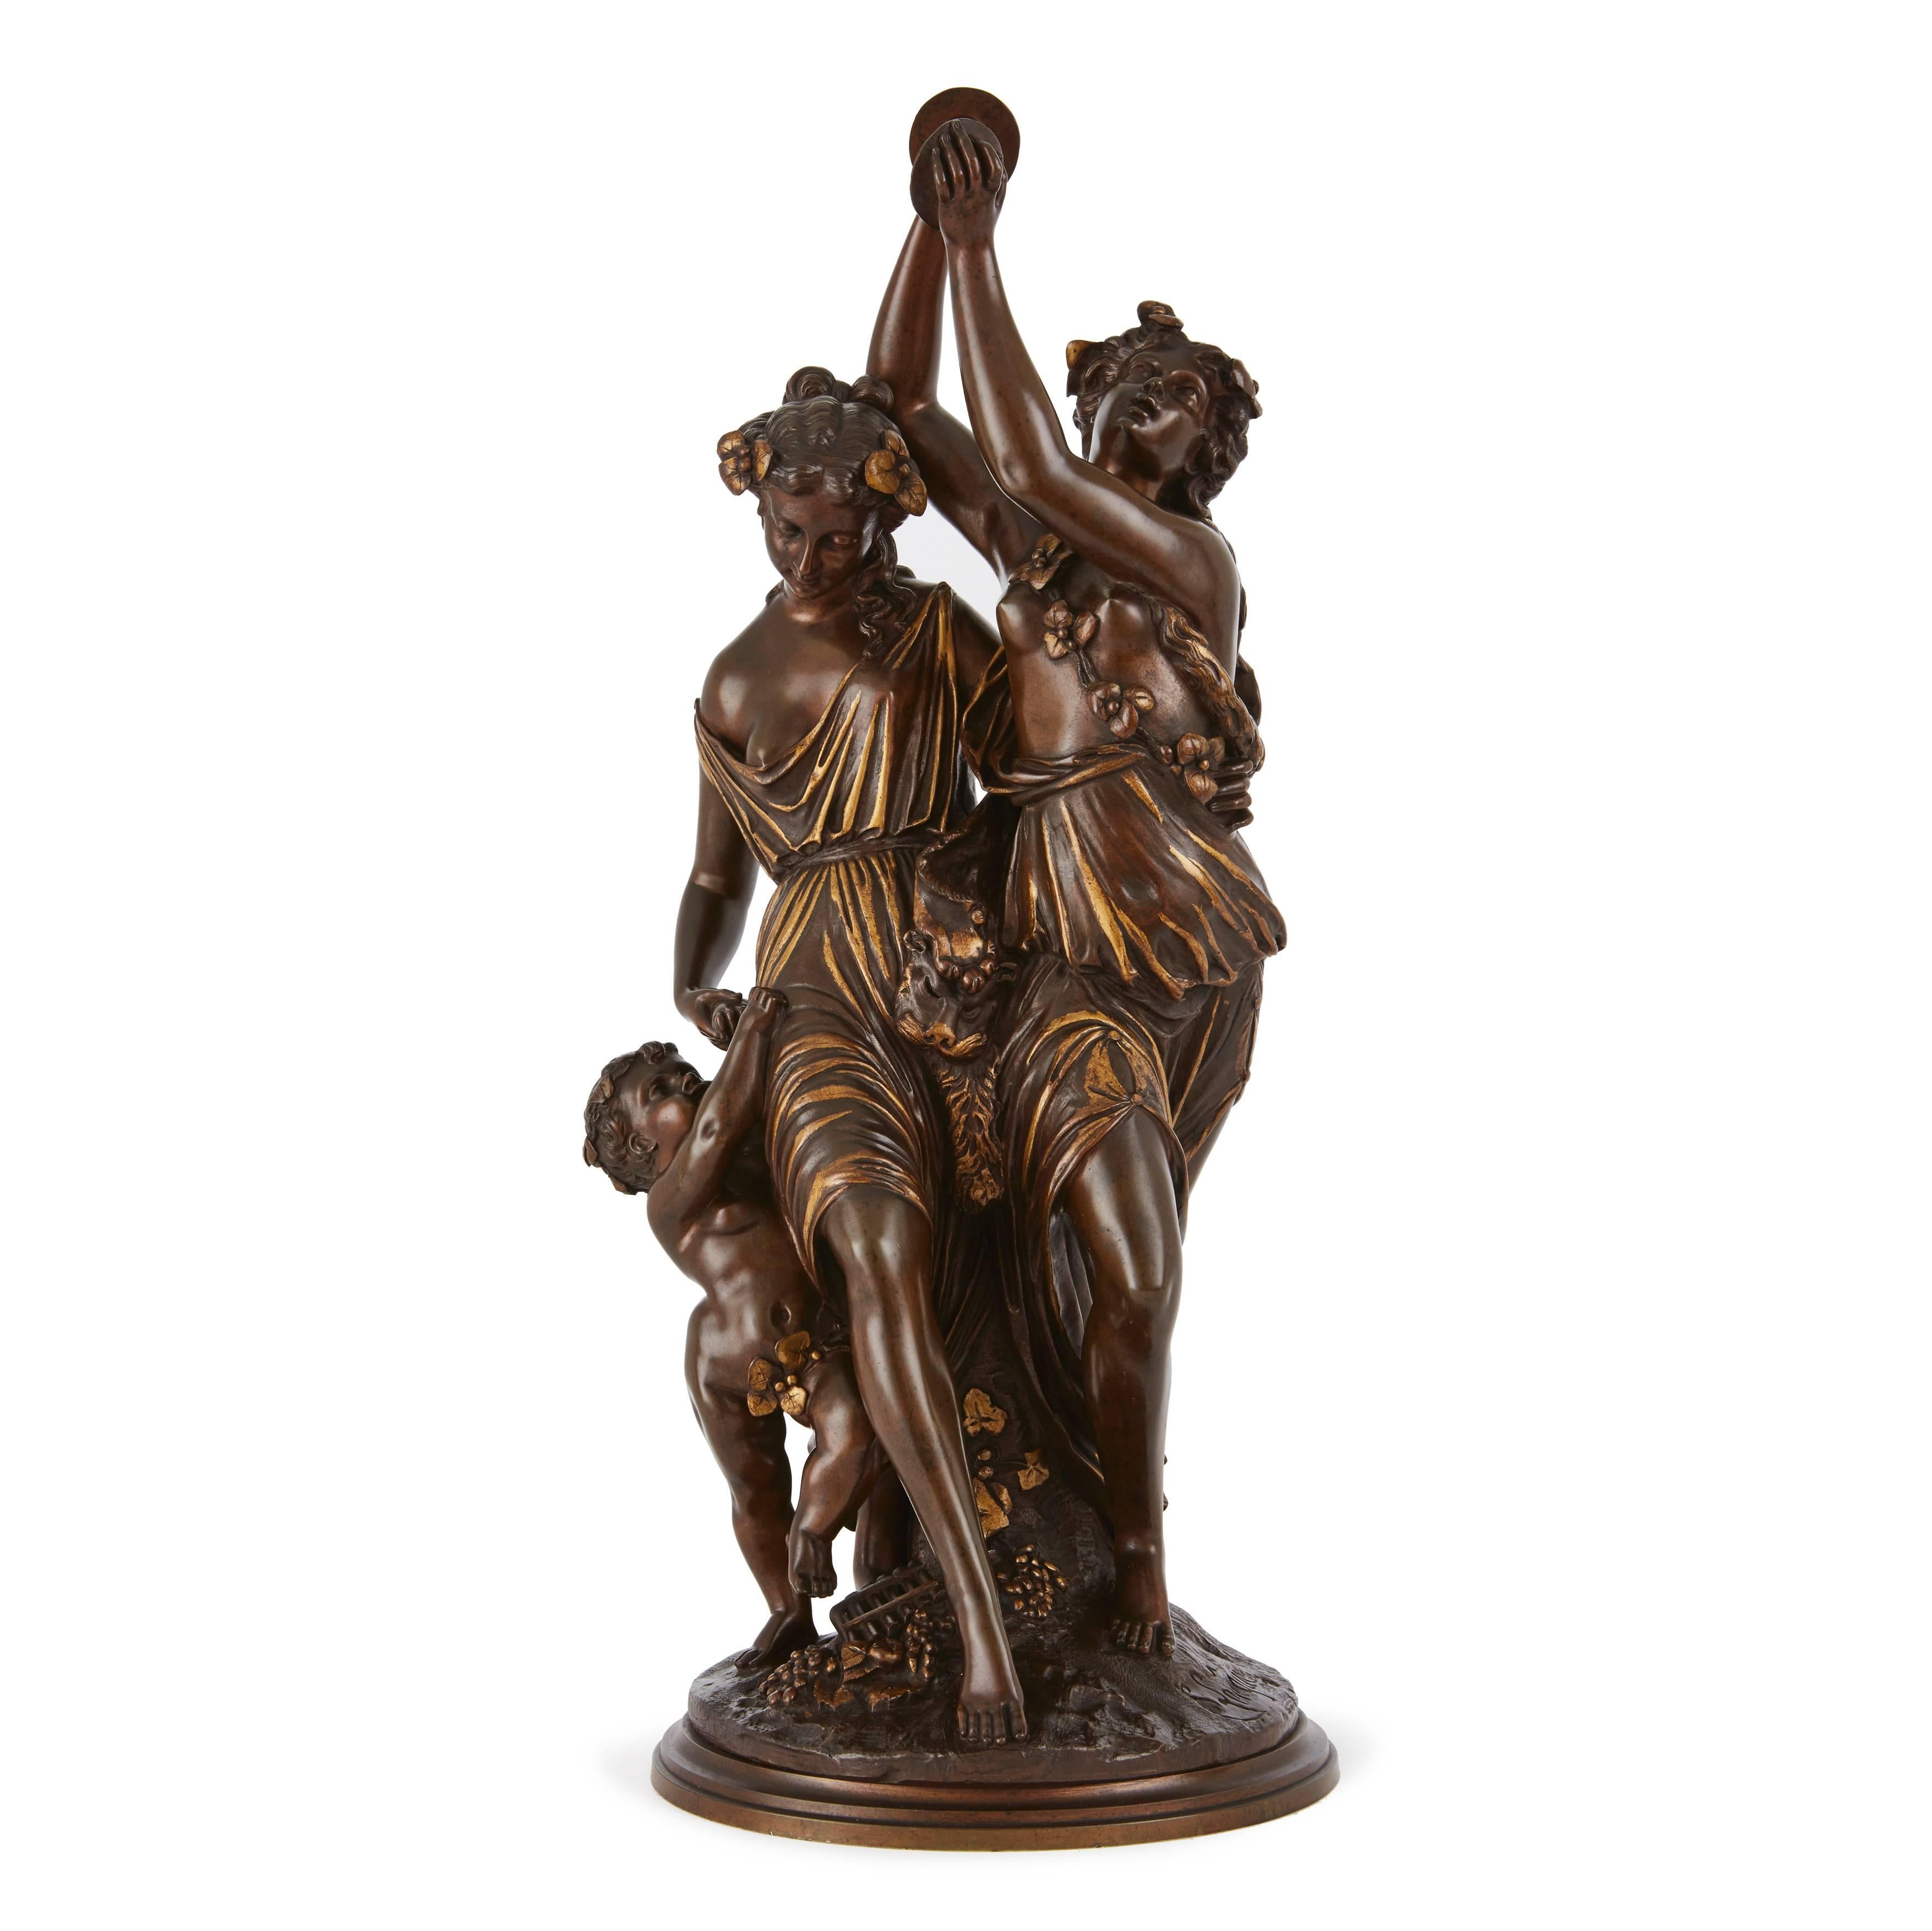 The intertwined dancing couple wearing neoclassical clothing, accompanied by a child putto, signed S. Loveque.